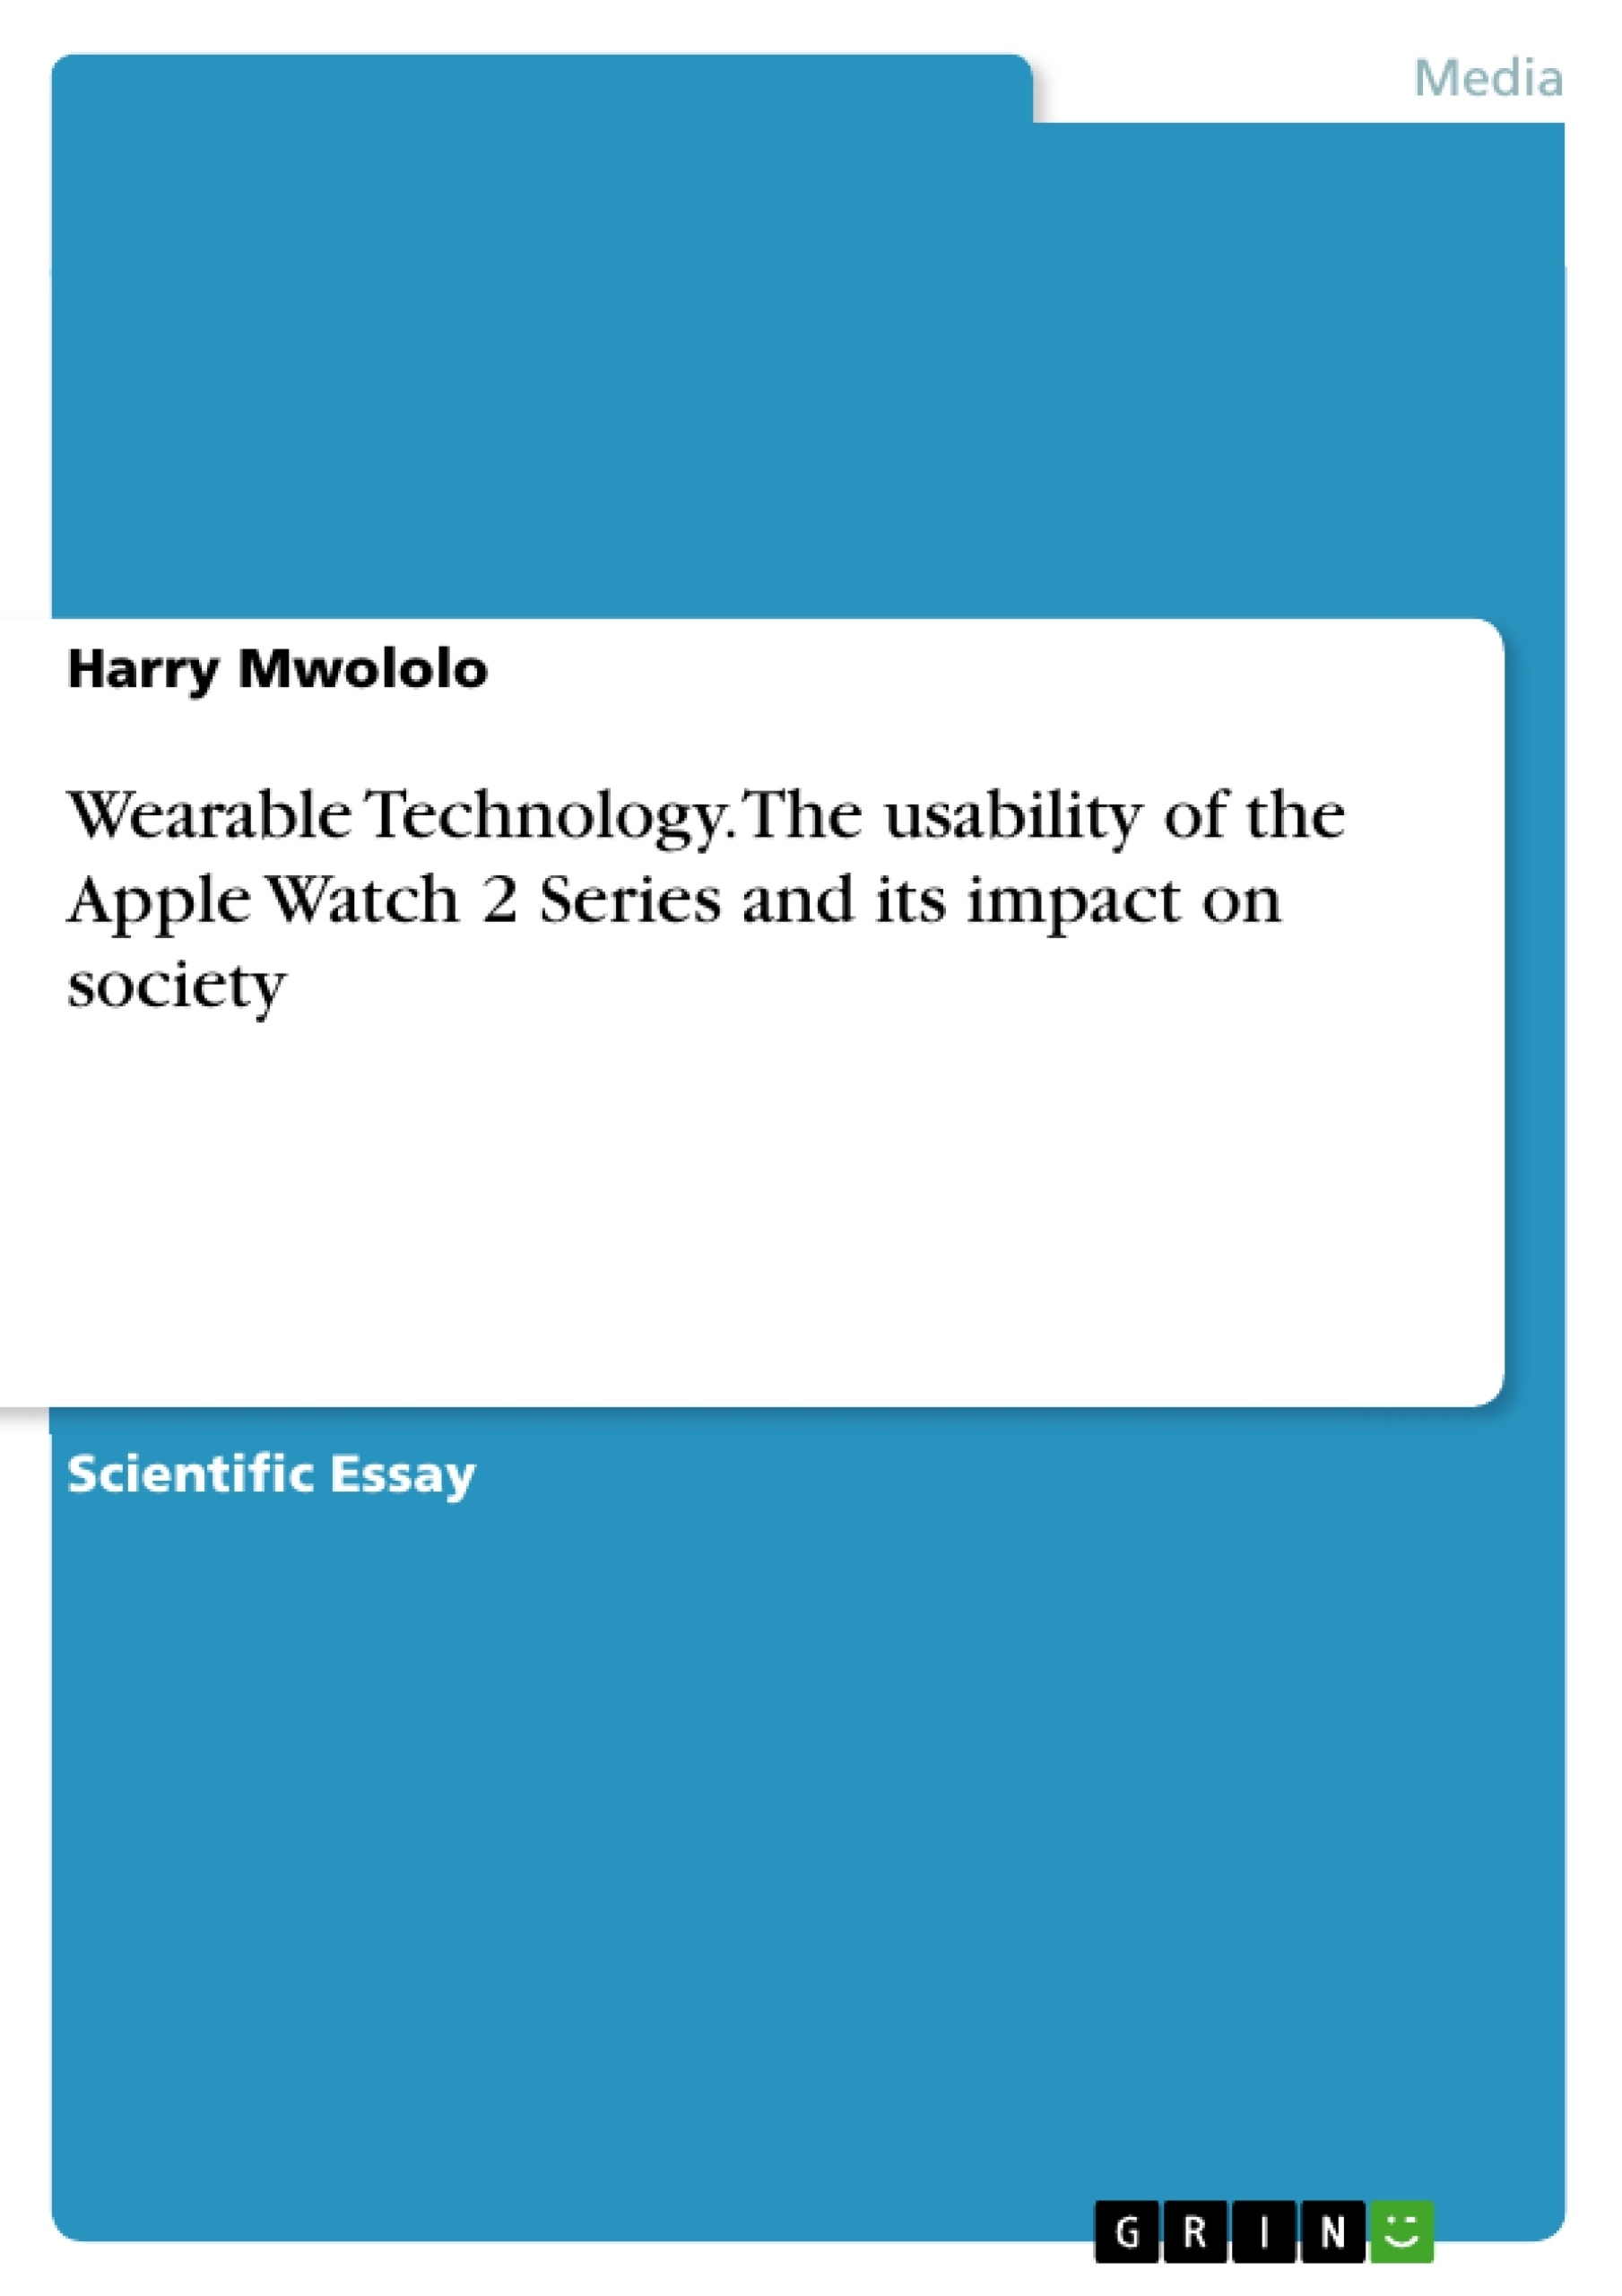 Título: Wearable Technology.  The usability of the Apple Watch 2 Series and its impact on society